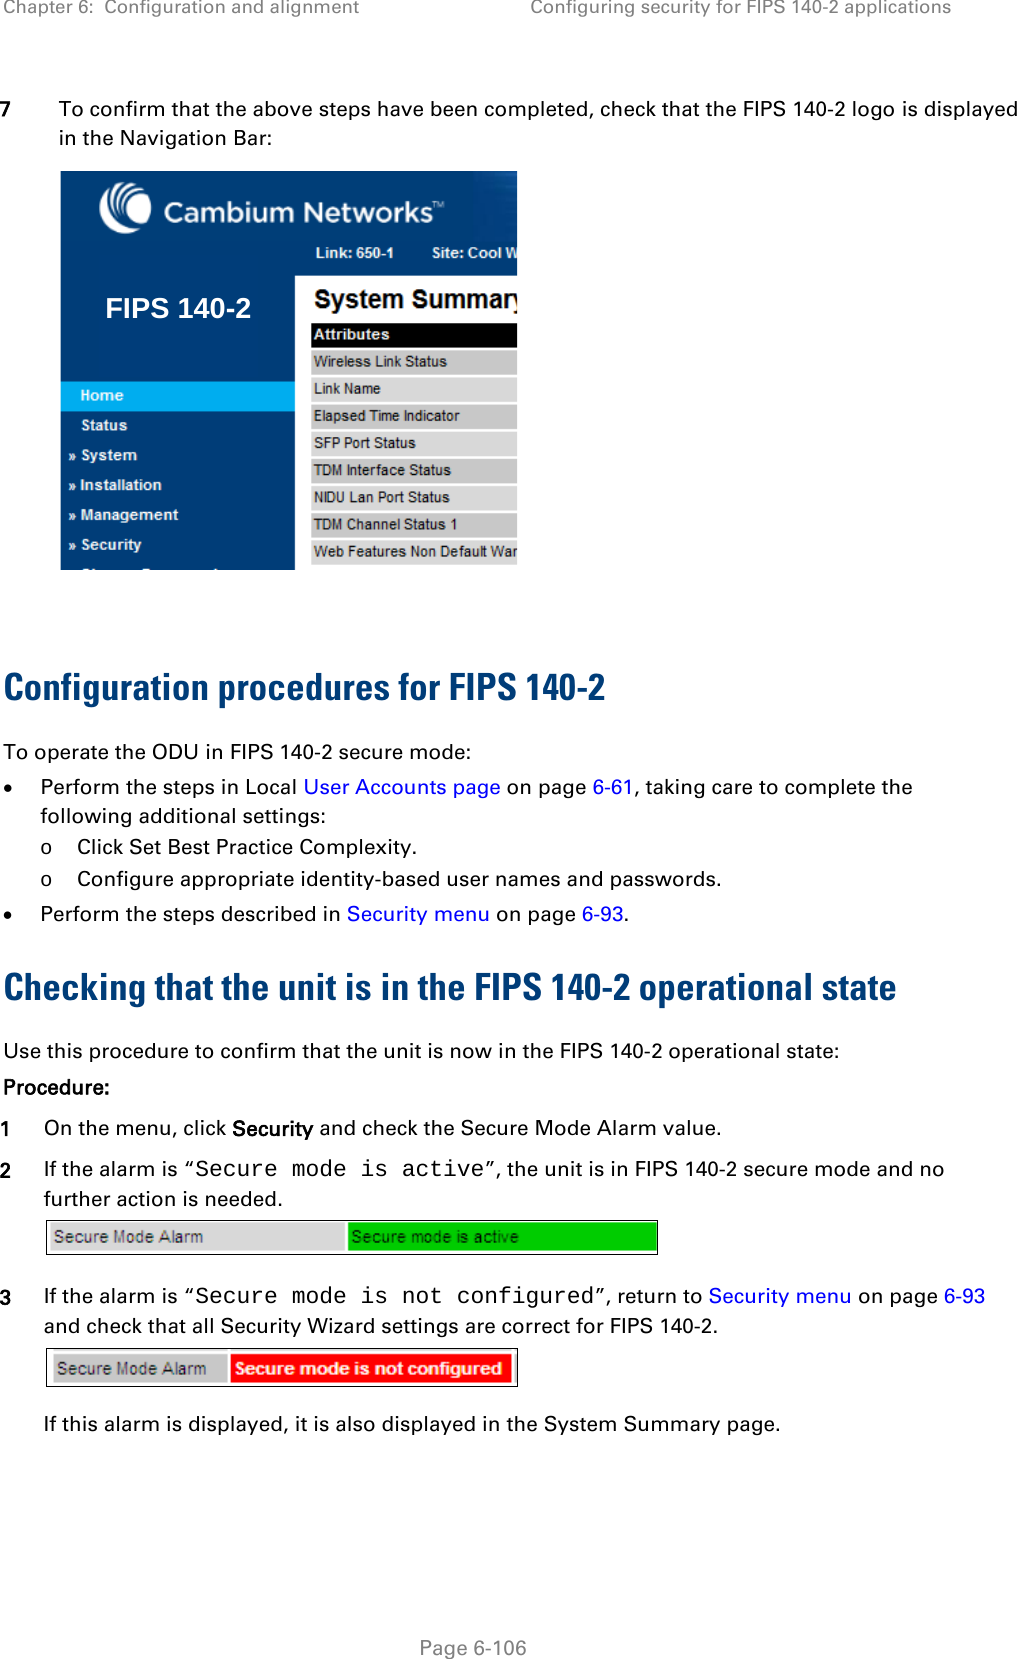 Chapter 6:  Configuration and alignment Configuring security for FIPS 140-2 applications  7 To confirm that the above steps have been completed, check that the FIPS 140-2 logo is displayed in the Navigation Bar:   Configuration procedures for FIPS 140-2 To operate the ODU in FIPS 140-2 secure mode: • Perform the steps in Local User Accounts page on page 6-61, taking care to complete the following additional settings: o Click Set Best Practice Complexity. o Configure appropriate identity-based user names and passwords. • Perform the steps described in Security menu on page 6-93. Checking that the unit is in the FIPS 140-2 operational state Use this procedure to confirm that the unit is now in the FIPS 140-2 operational state: Procedure: 1 On the menu, click Security and check the Secure Mode Alarm value. 2 If the alarm is “Secure mode is active”, the unit is in FIPS 140-2 secure mode and no further action is needed.  3 If the alarm is “Secure mode is not configured”, return to Security menu on page 6-93 and check that all Security Wizard settings are correct for FIPS 140-2.  If this alarm is displayed, it is also displayed in the System Summary page. FIPS 140-2 Page 6-106 